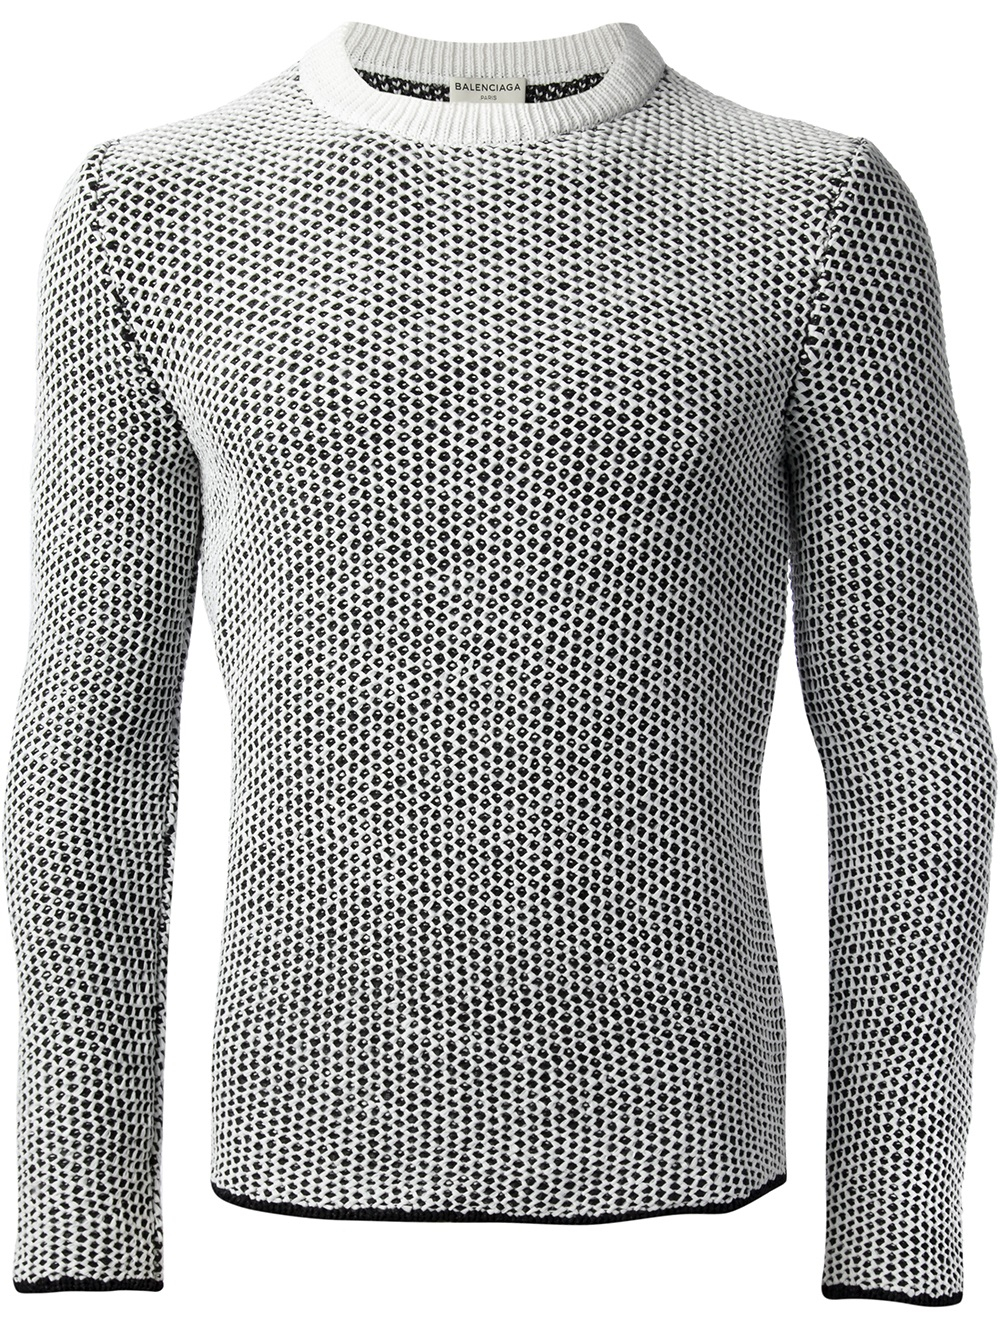 Lyst - Balenciaga Honeycomb Knit Sweater in White for Men